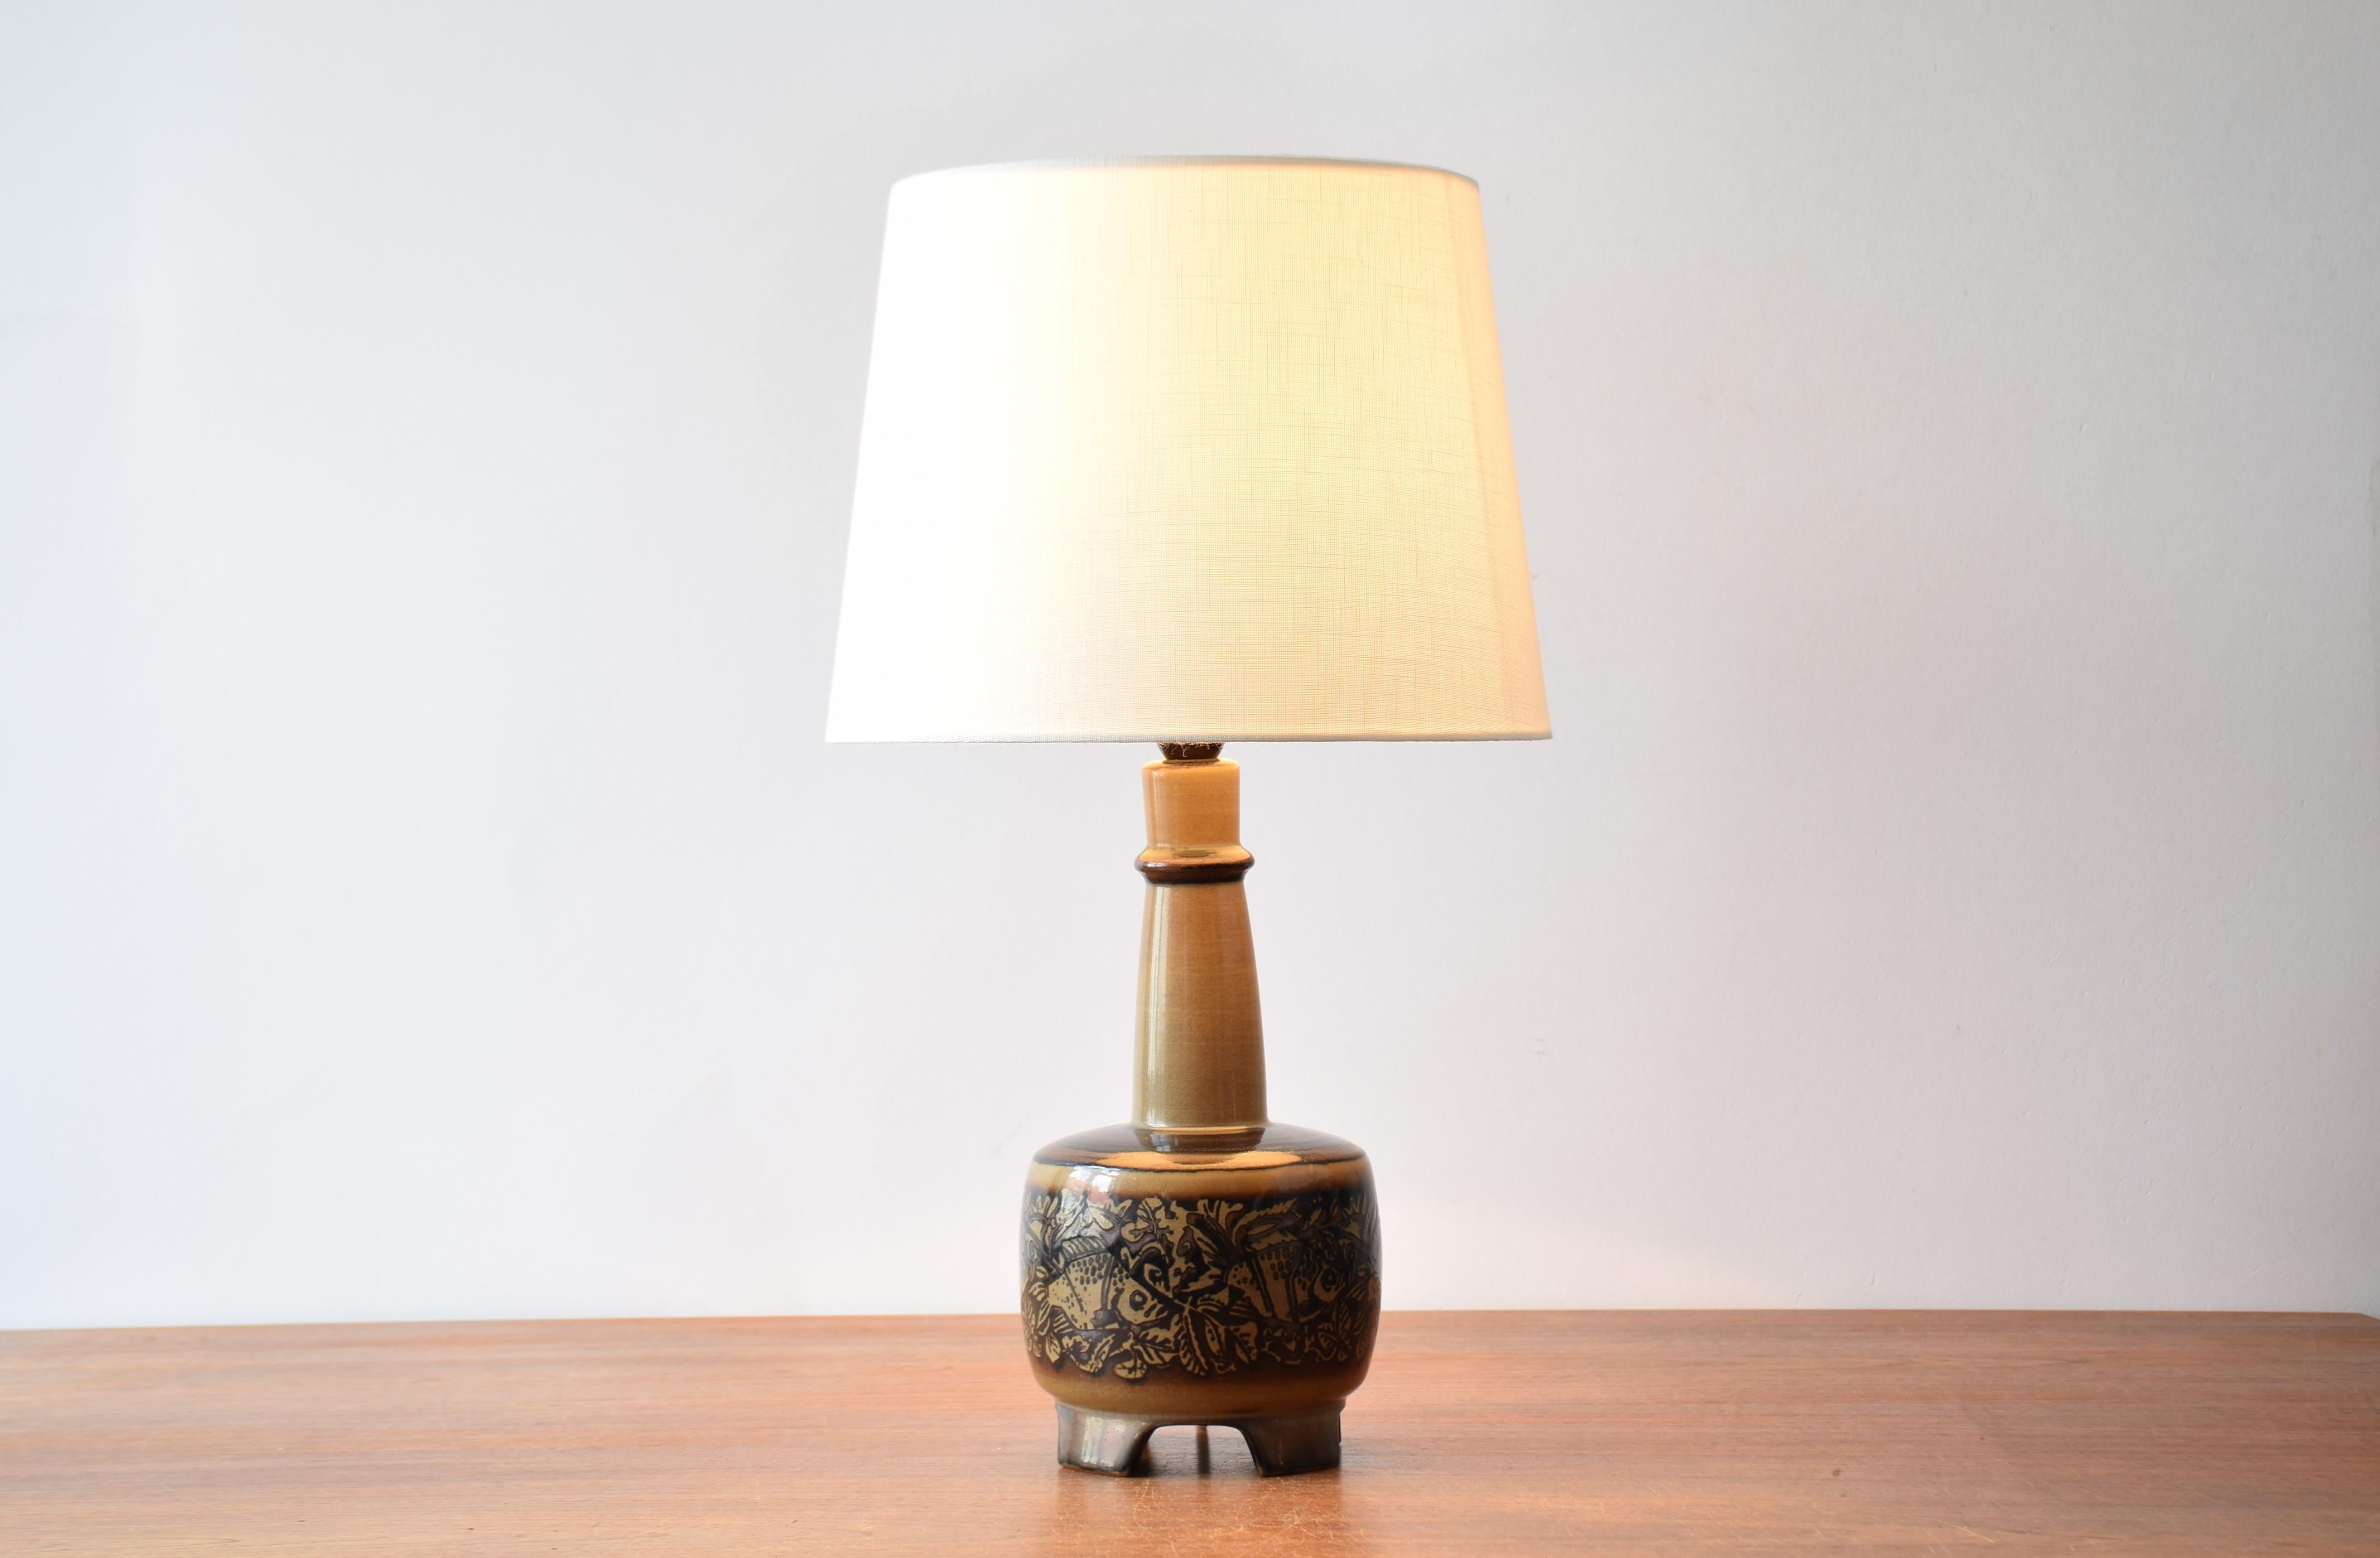 Vintage Danish table lamp designed by Nils Thorsson for Royal Copenhagen in cooperation with Fog & Mørup.
The lamp features a fish motif around the base.

Made circa 1960s or 1970s.

The lamp is marked both with the Royal Copenhagen 3 waves